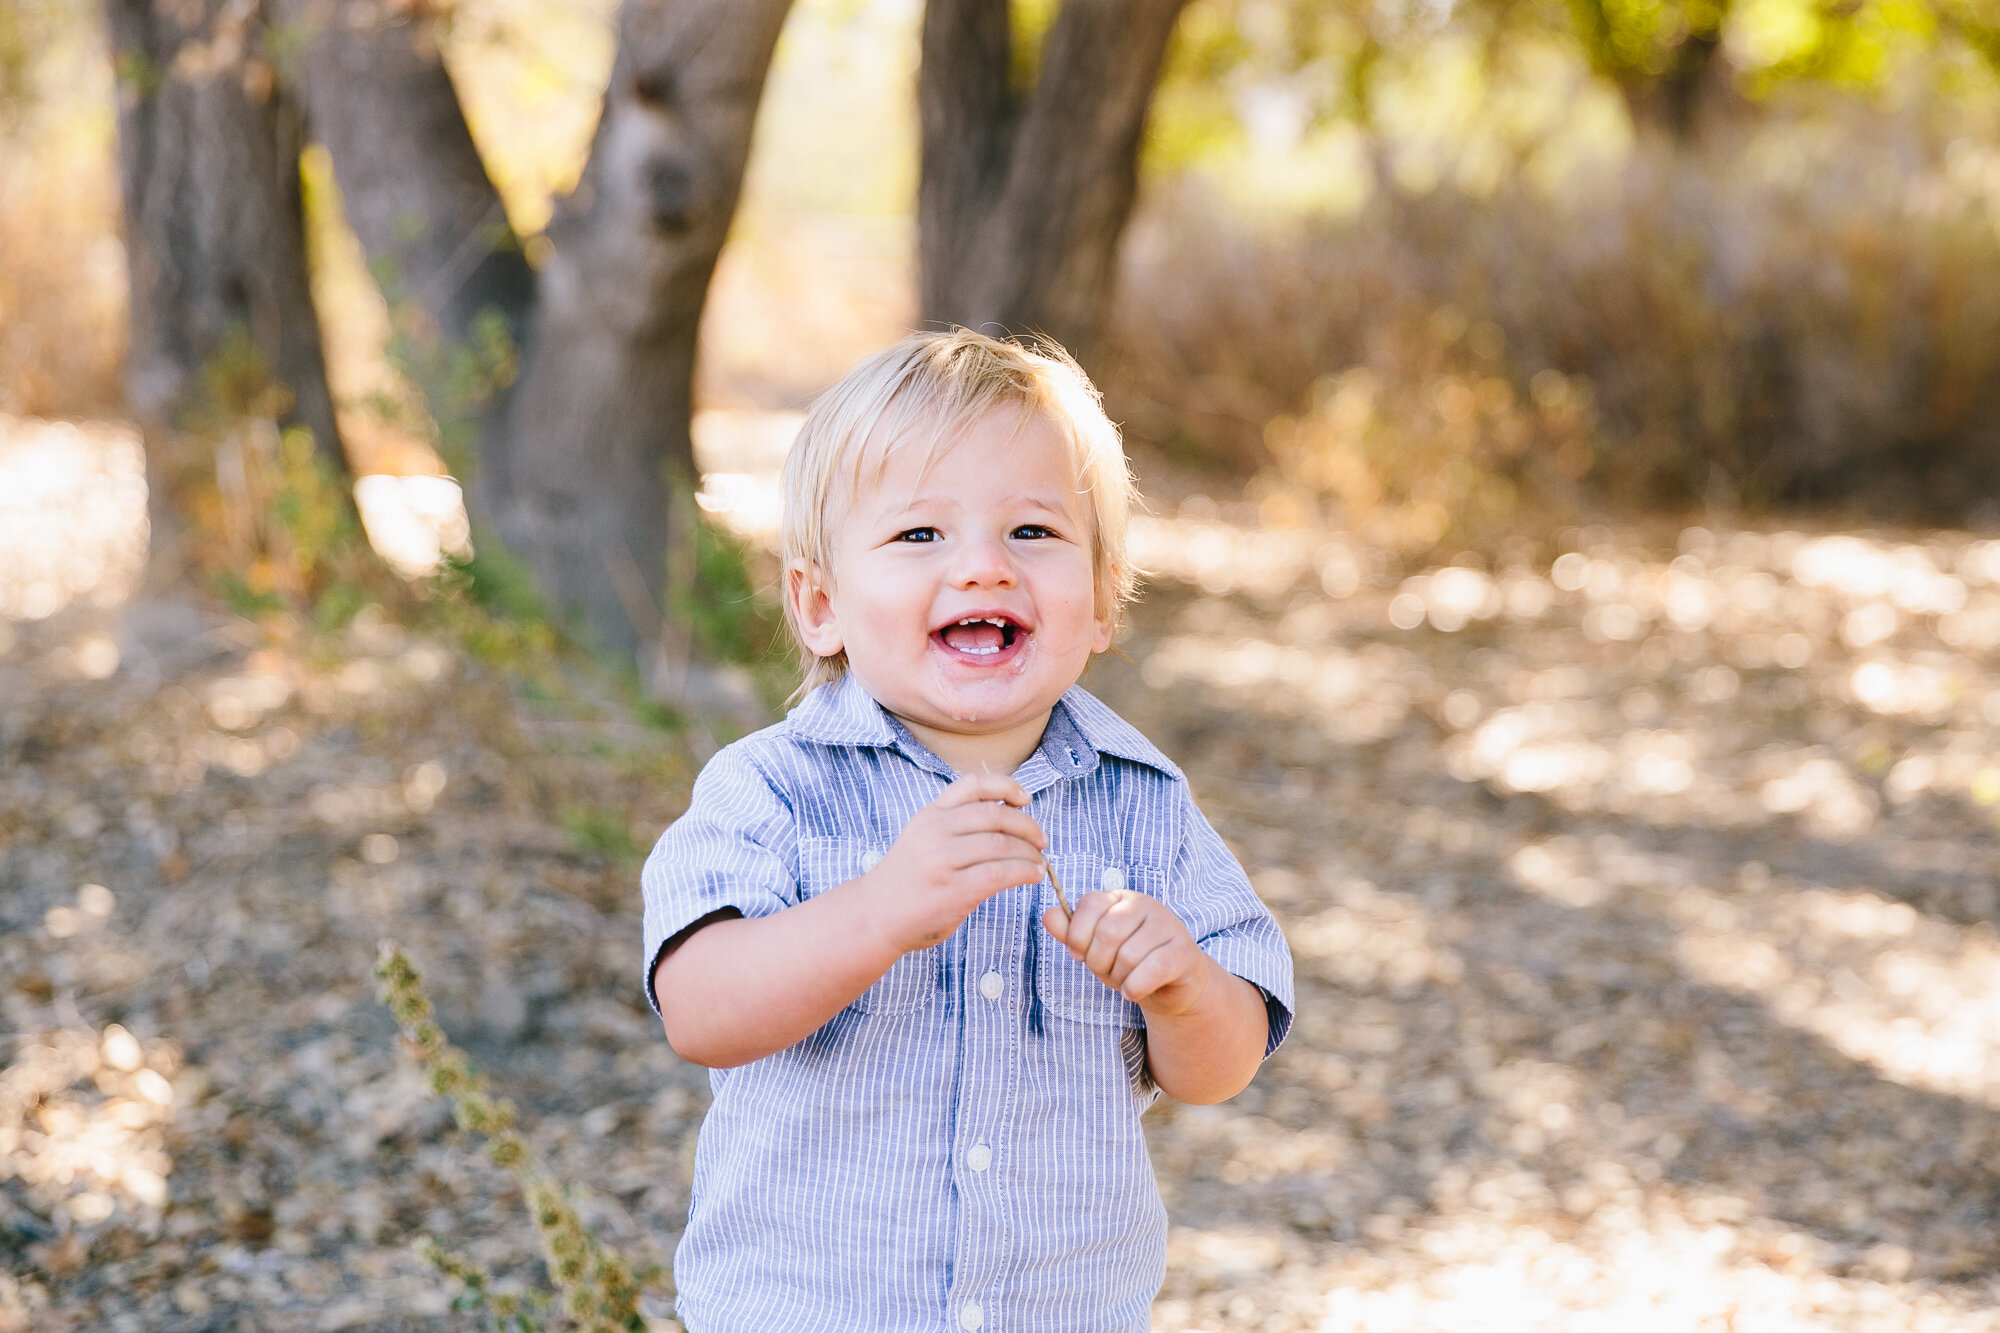 Los_Angeles_Family_Photography_Orange_County_Children_Babies_Field_Farm_Outdoors_Morning_Session_California_Girls_Boys_Kids_Photography-0914.jpg